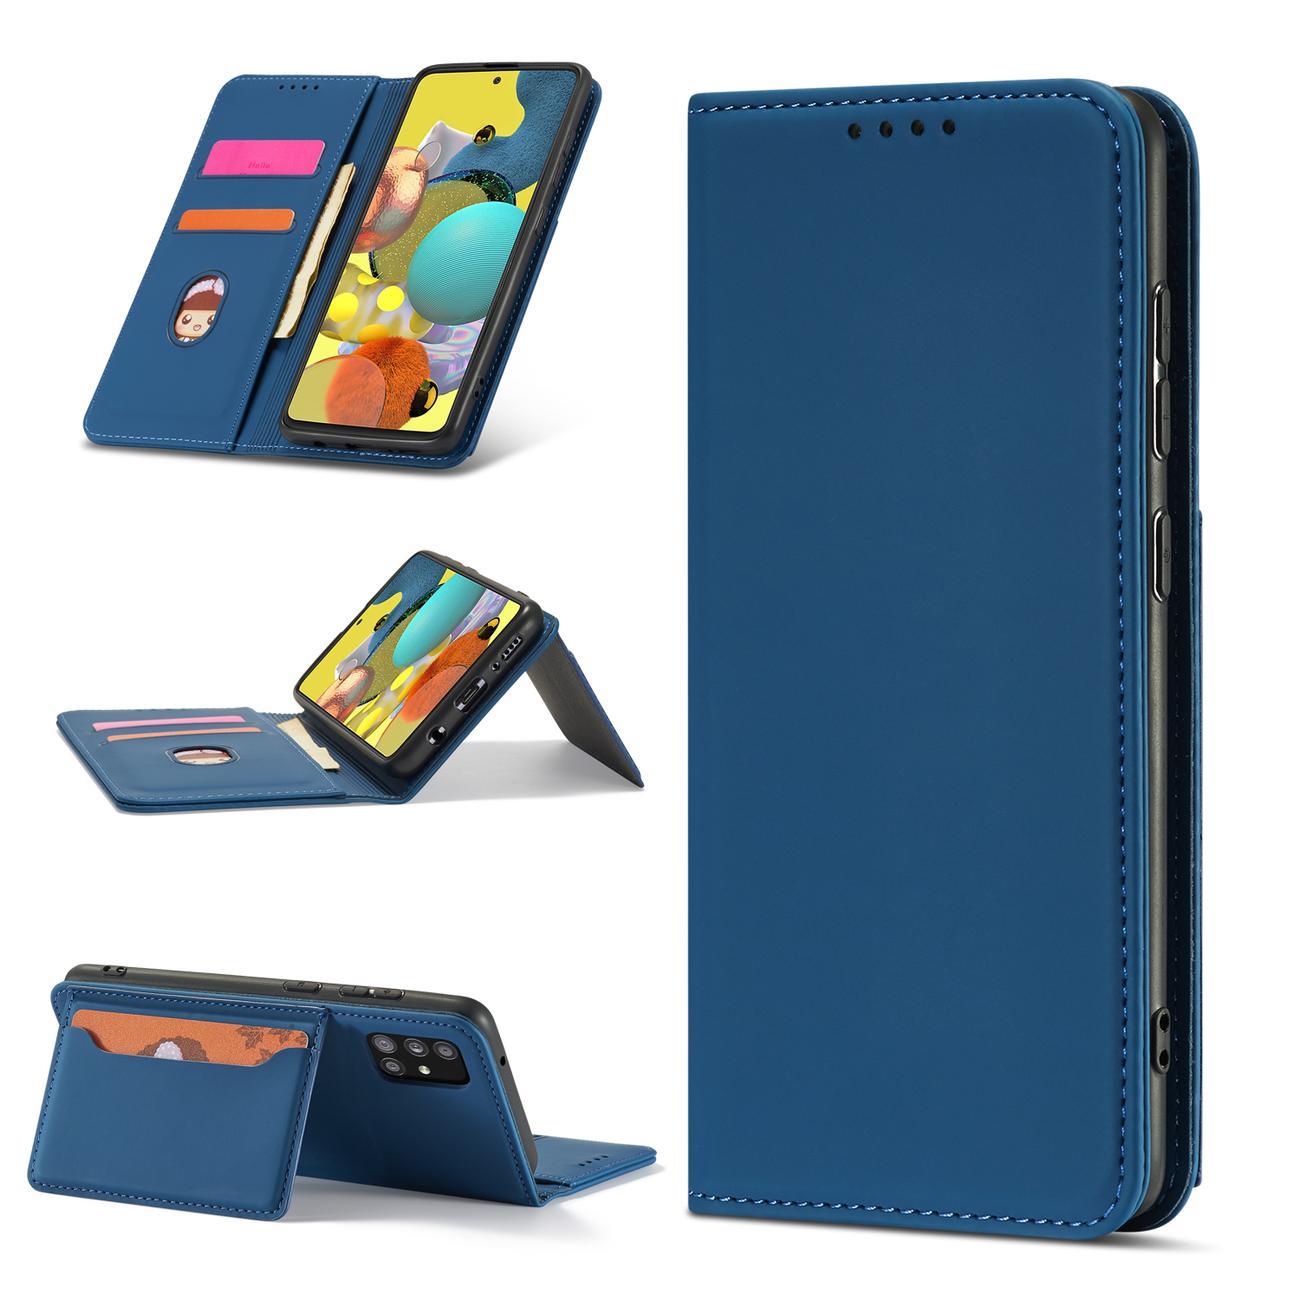 Magnet Card Case Case for Samsung Galaxy A52 5G Pouch Wallet Card Holder Blue